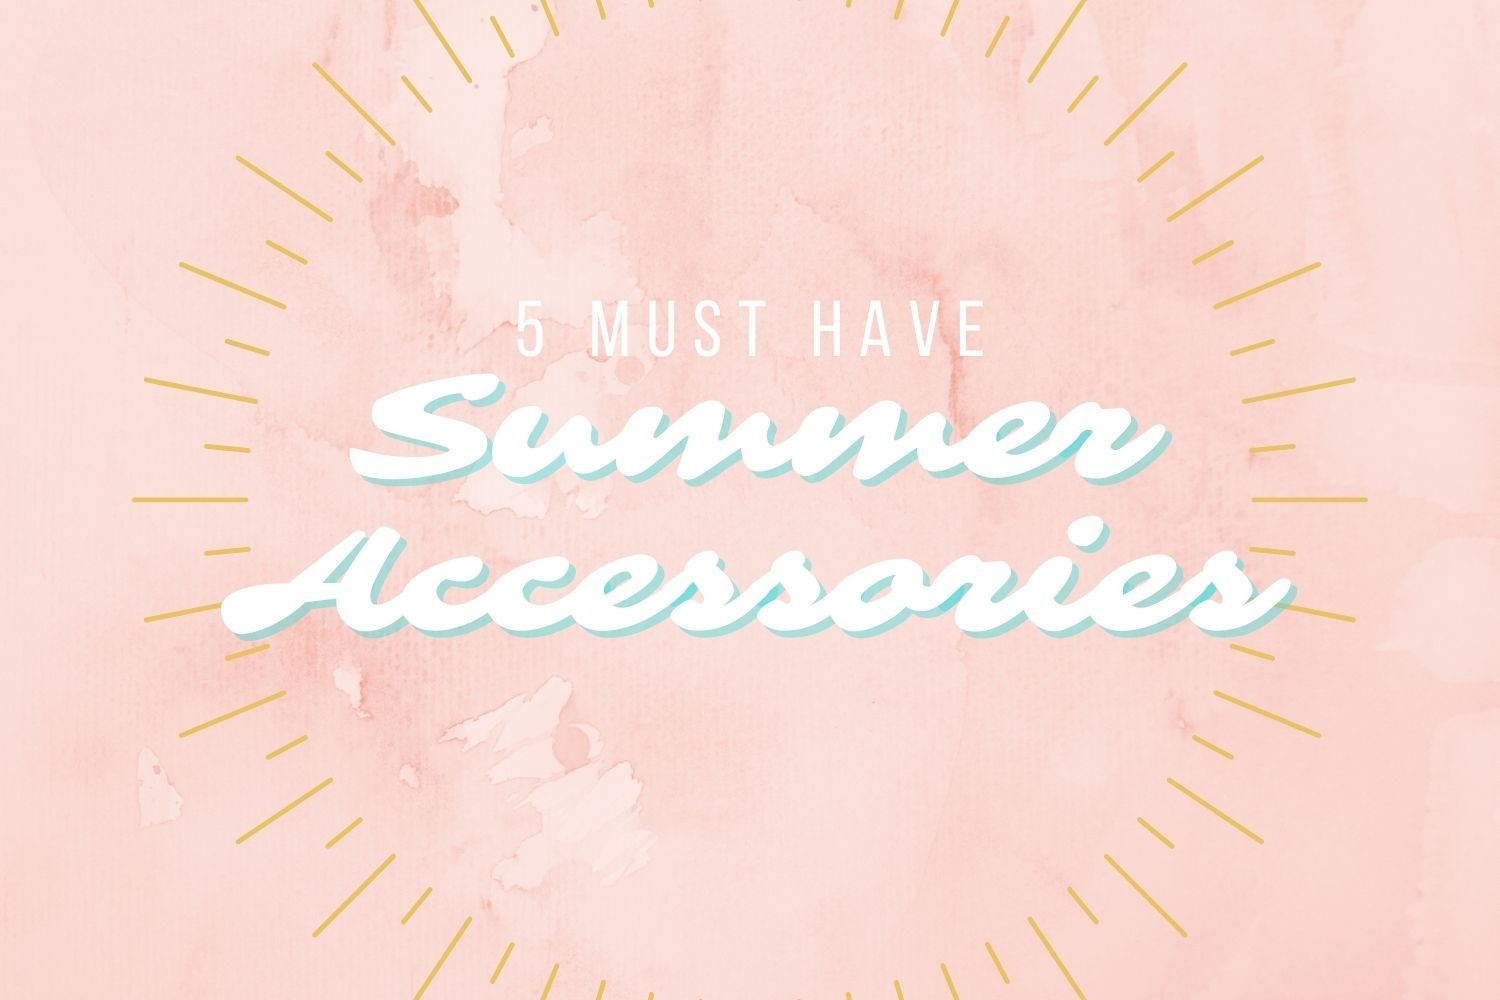 Five Summer Must Have Accessories